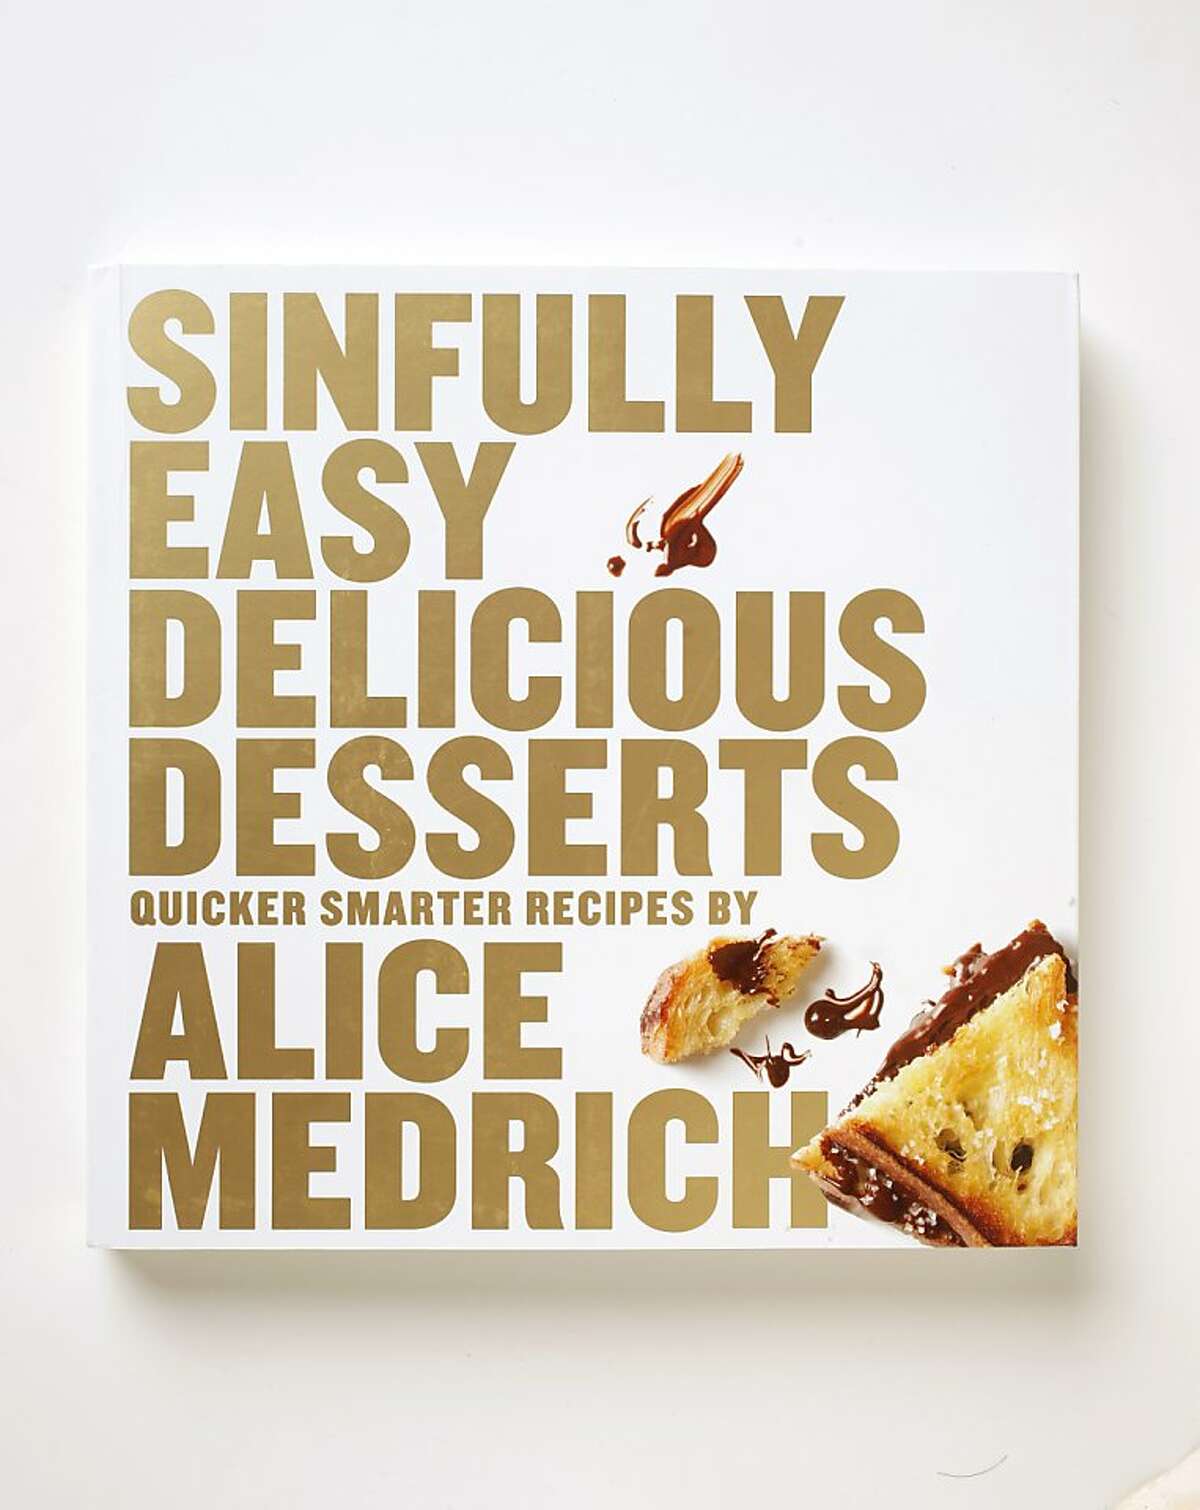 "Sinfully Easy Delicious Desserts," by Alice Medrich, as seen in San Francisco, California on Wednesday, June 20, 2012.